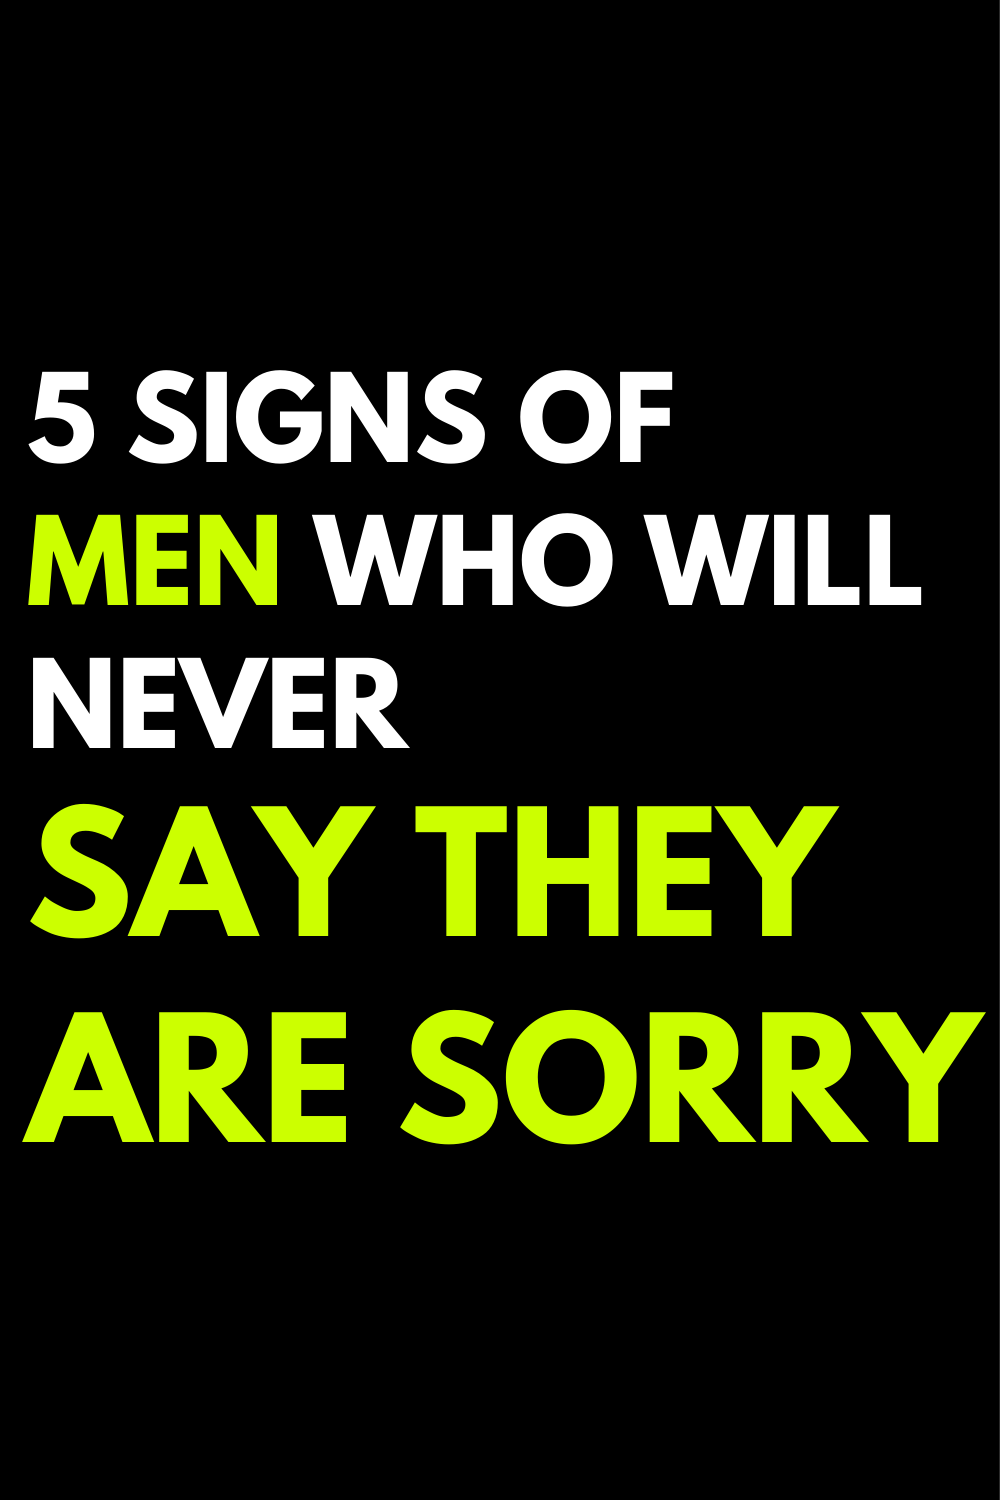 5 signs of men who will never say they are sorry